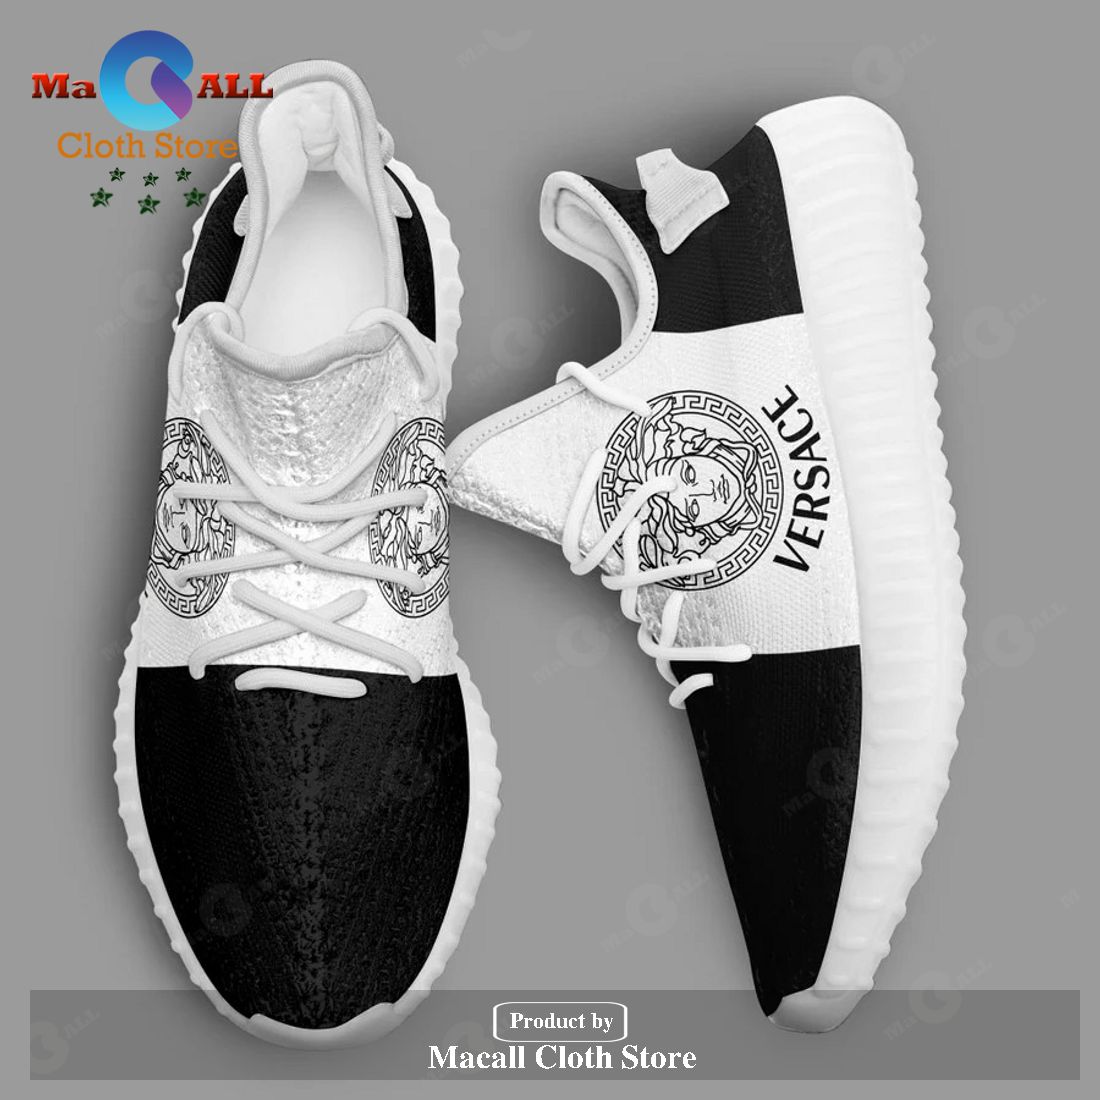 Gianni Versace Black White Model 5 Yeezy Boost Shoes Sport Sneakers Best  For Men Women - Macall Cloth Store - Destination for fashionistas